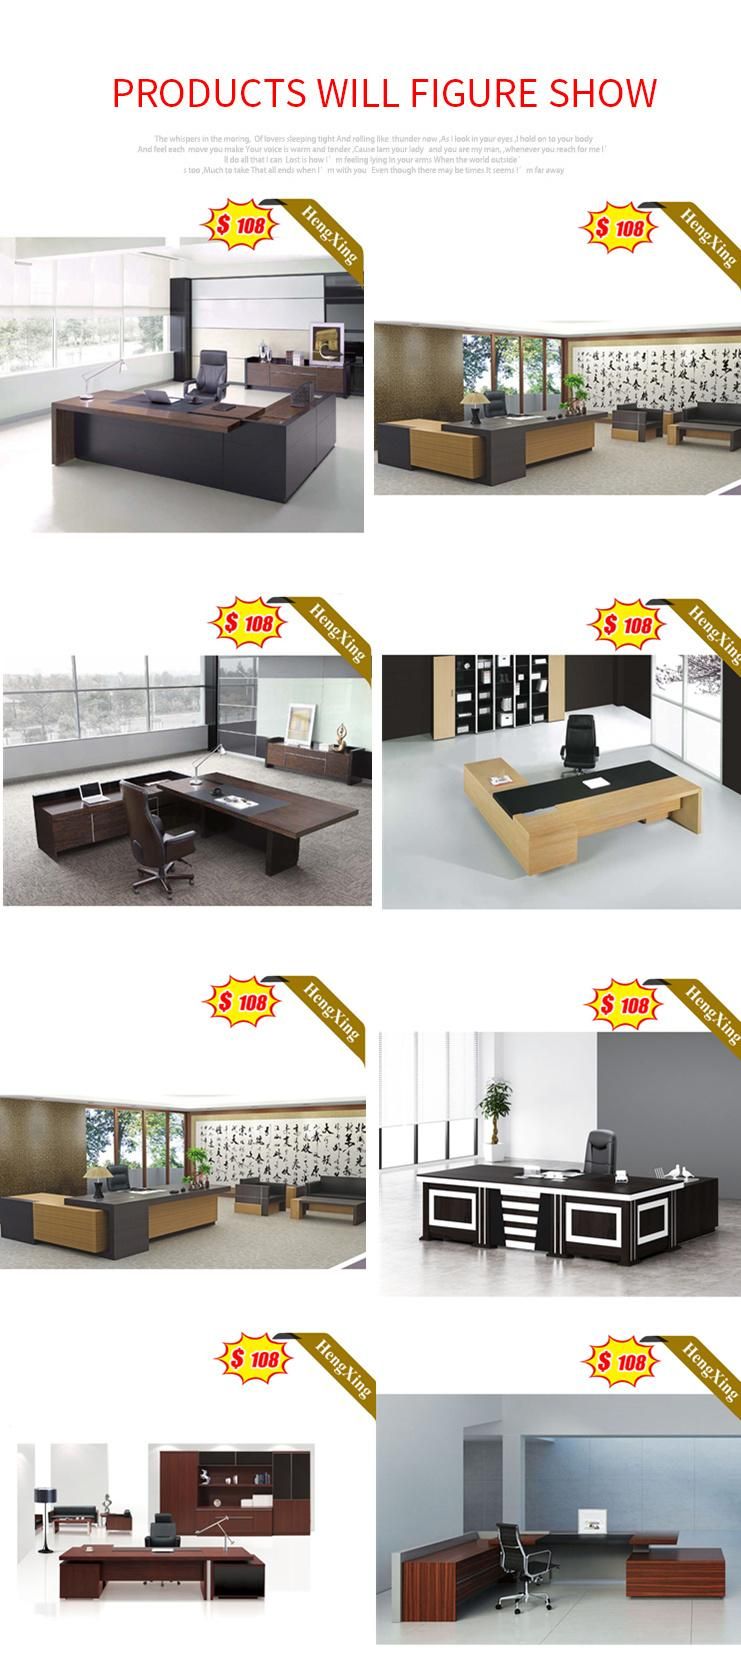 New Design Panel Office Table Home Office Furniture Executive Table